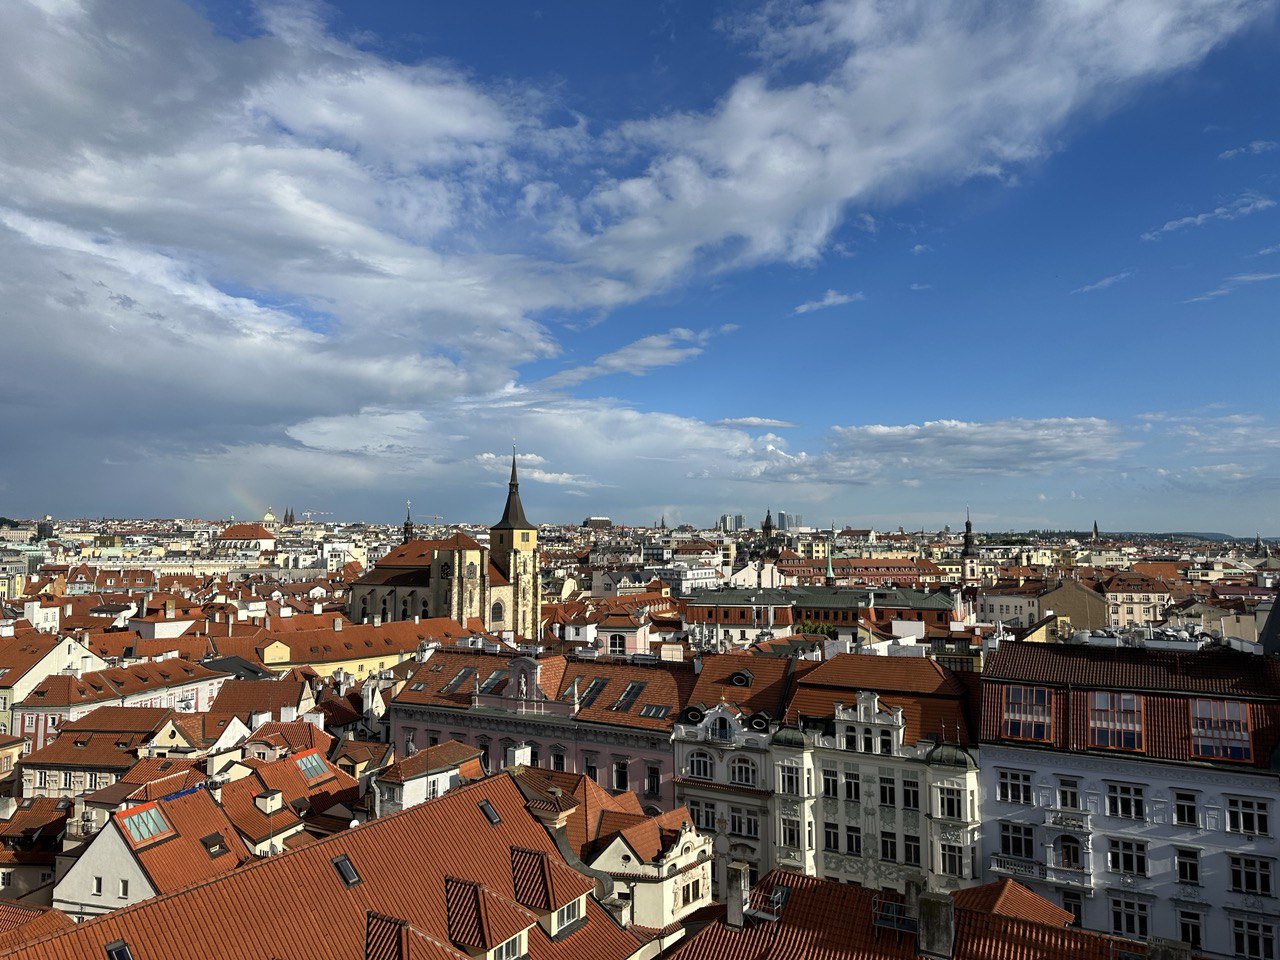 A view of Prague from the top of the Astronomical Tower